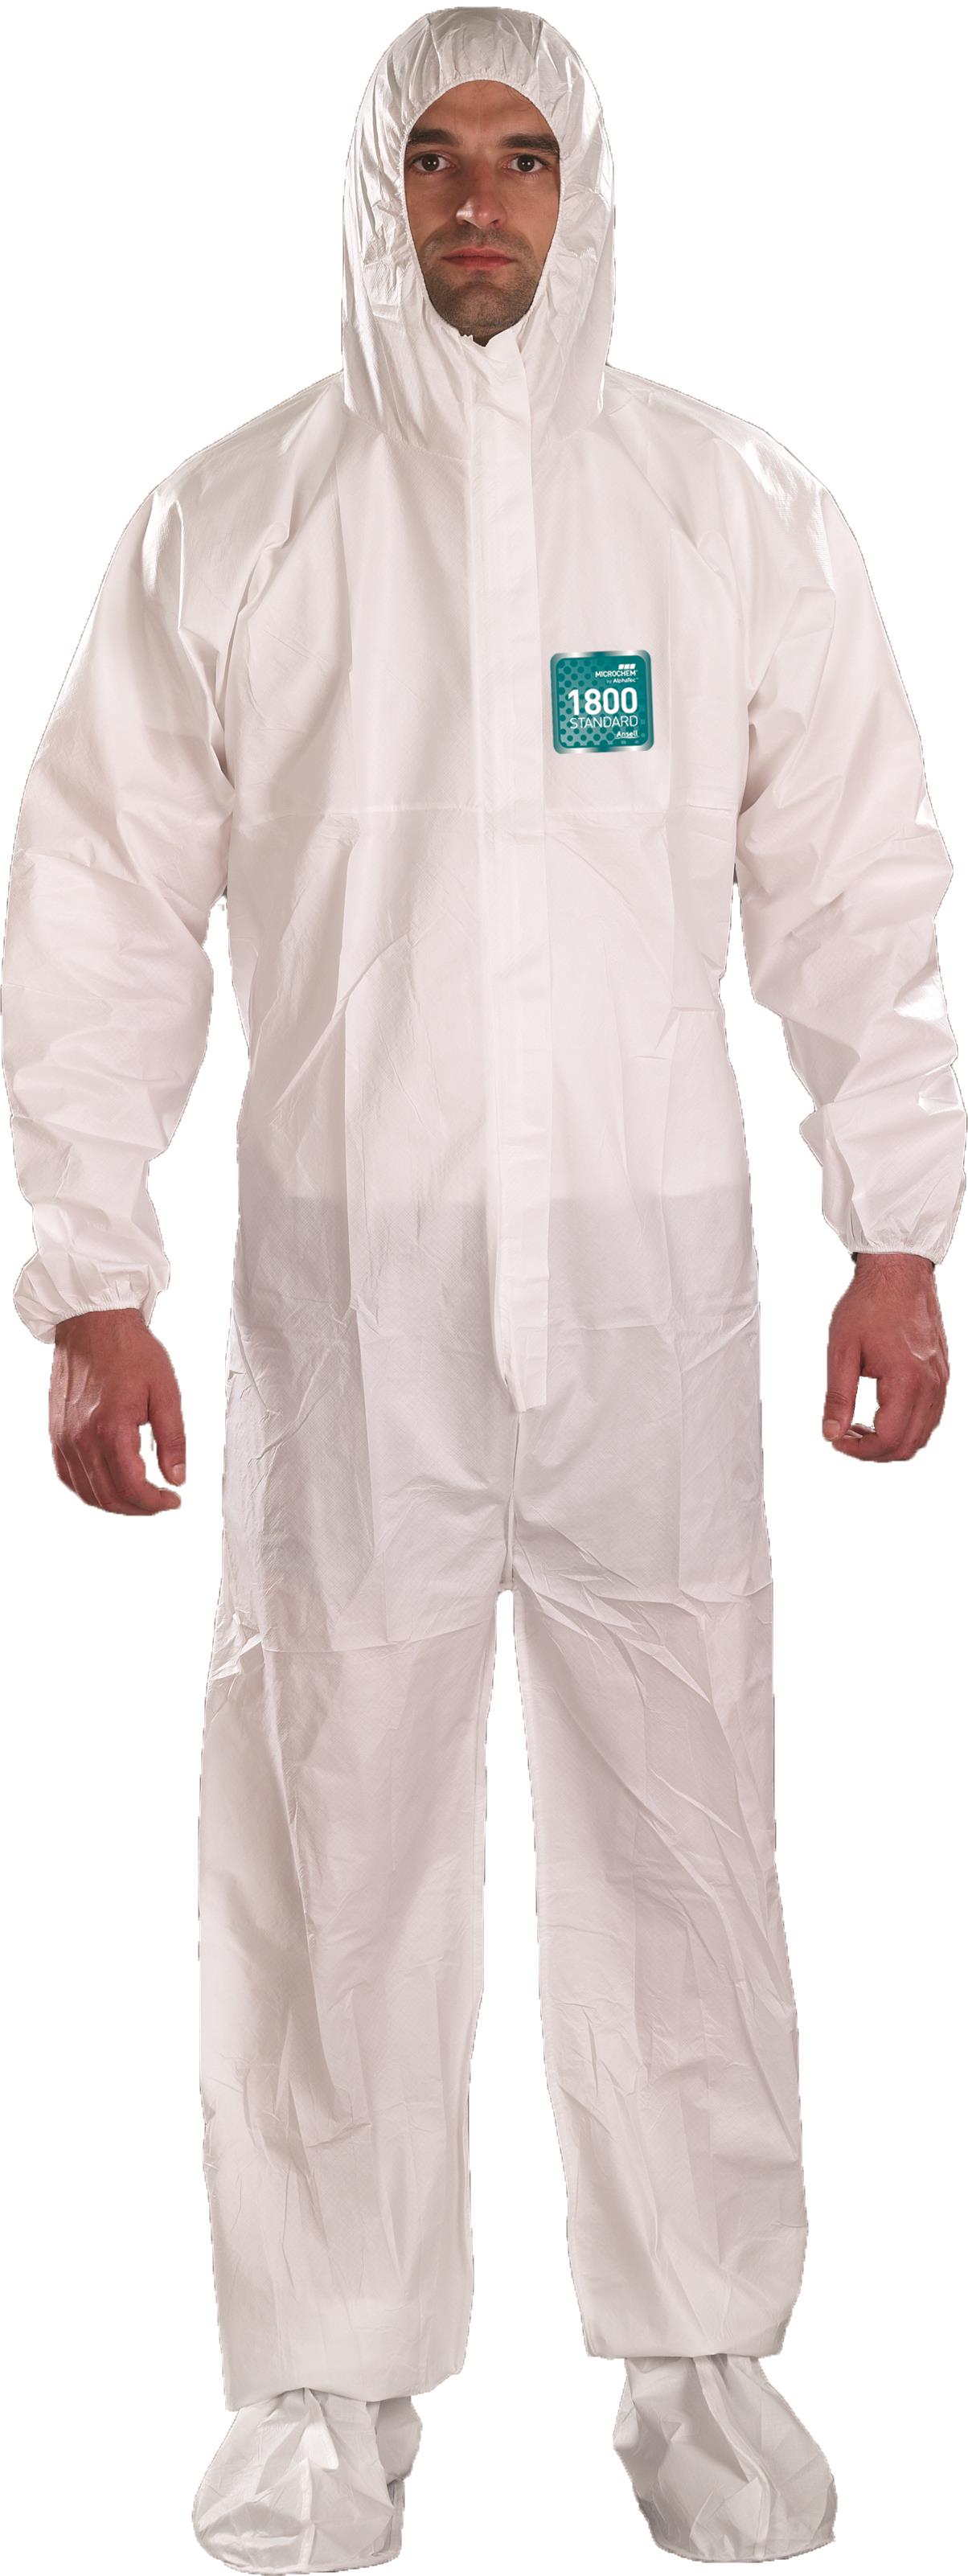 MICROCHEM 1800 HOODED BOOTED COVERALL - Microchem by AlphaTec